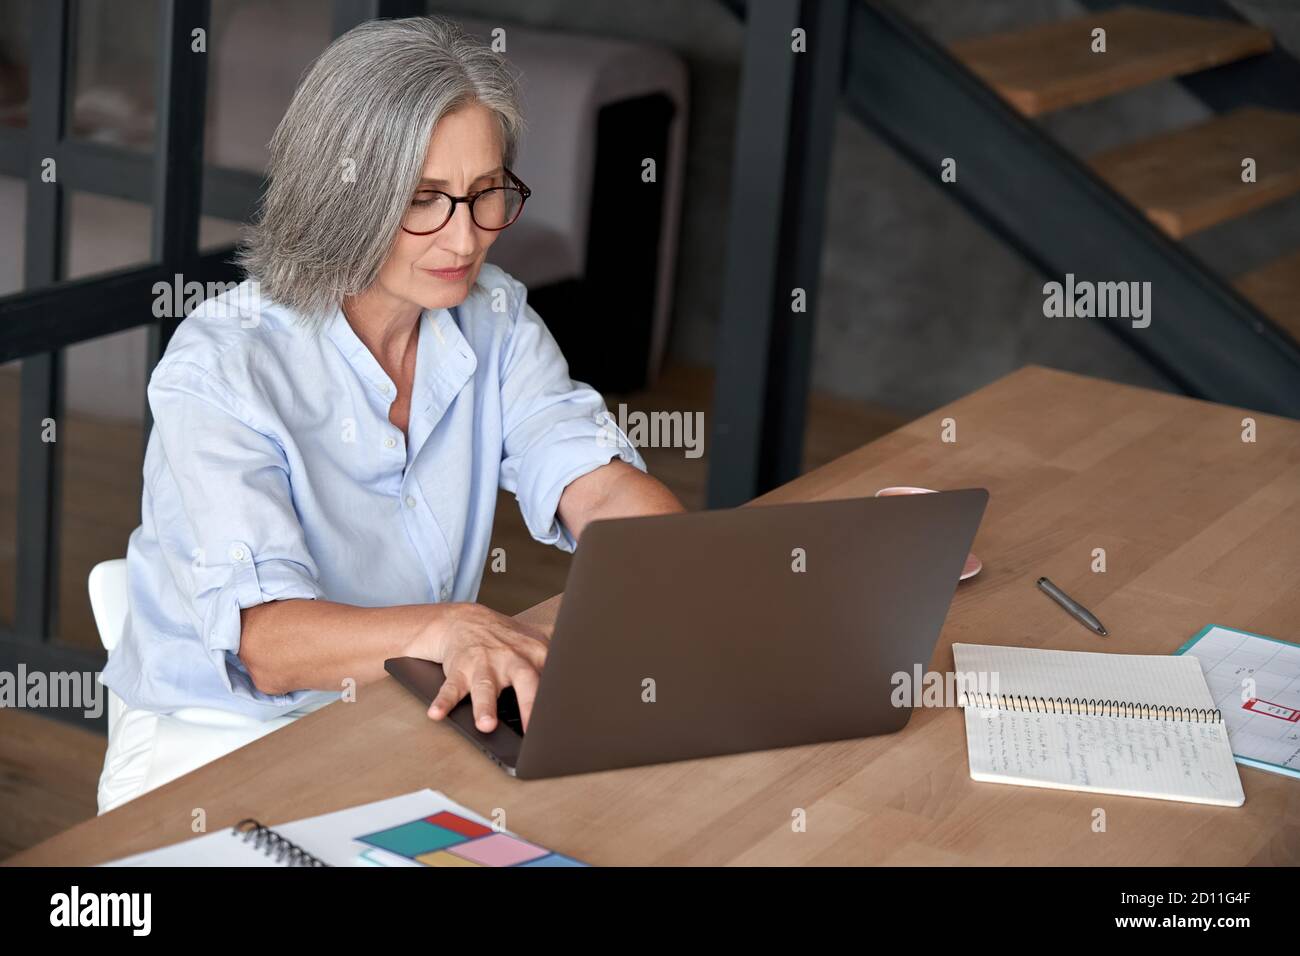 Older mature middle aged woman using laptop computer sitting at work desk. Stock Photo